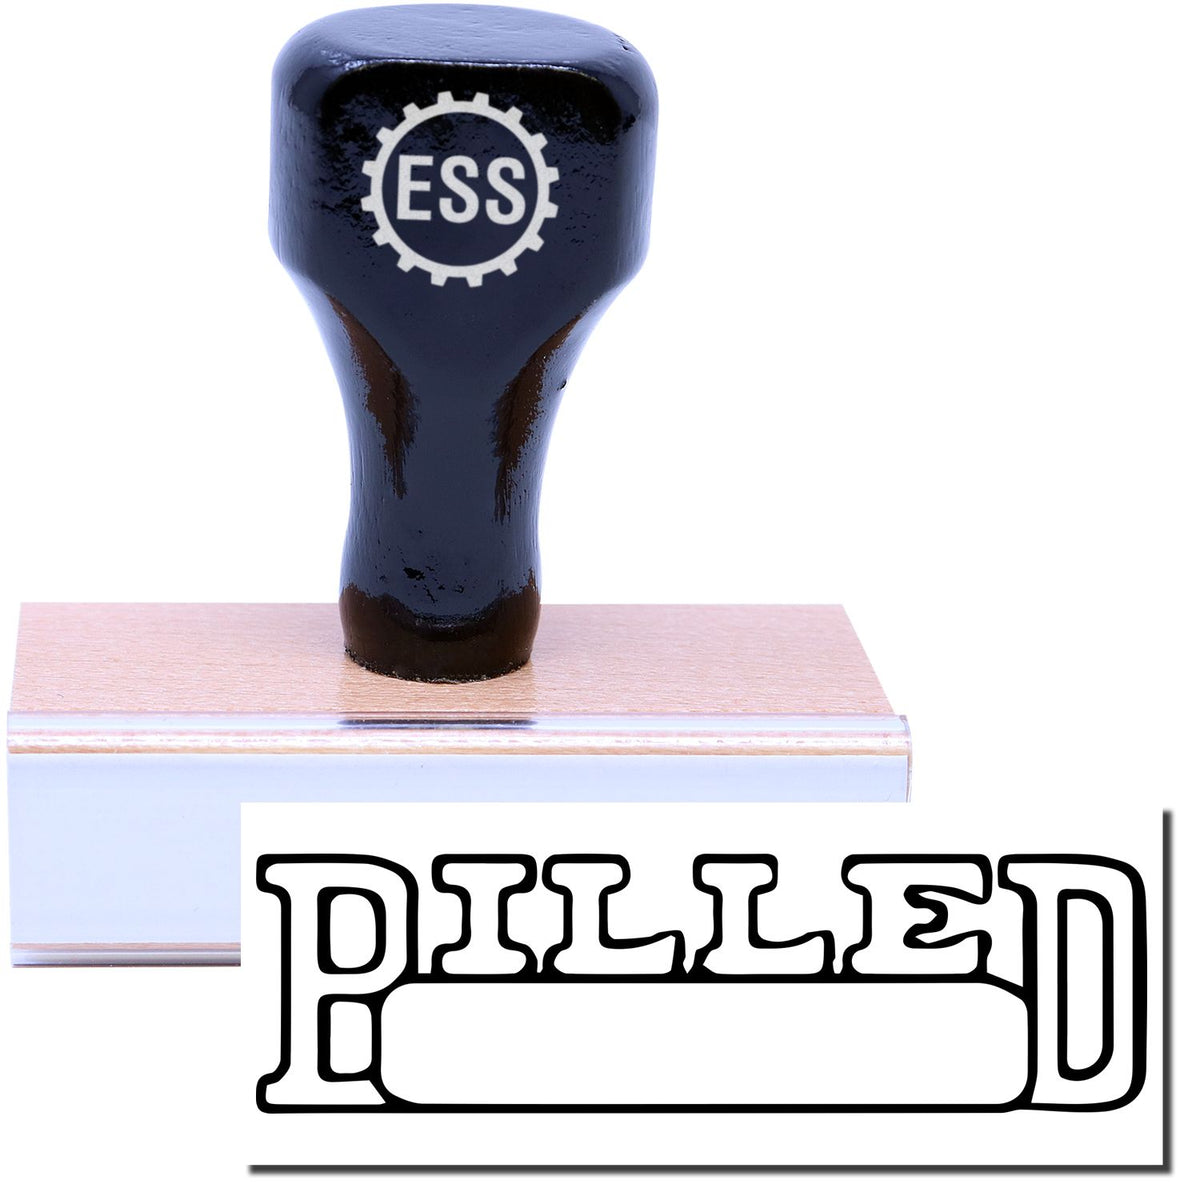 A stock office rubber stamp with a stamped image showing how the text &quot;BILLED&quot; in a large outline font with a date box is displayed after stamping.